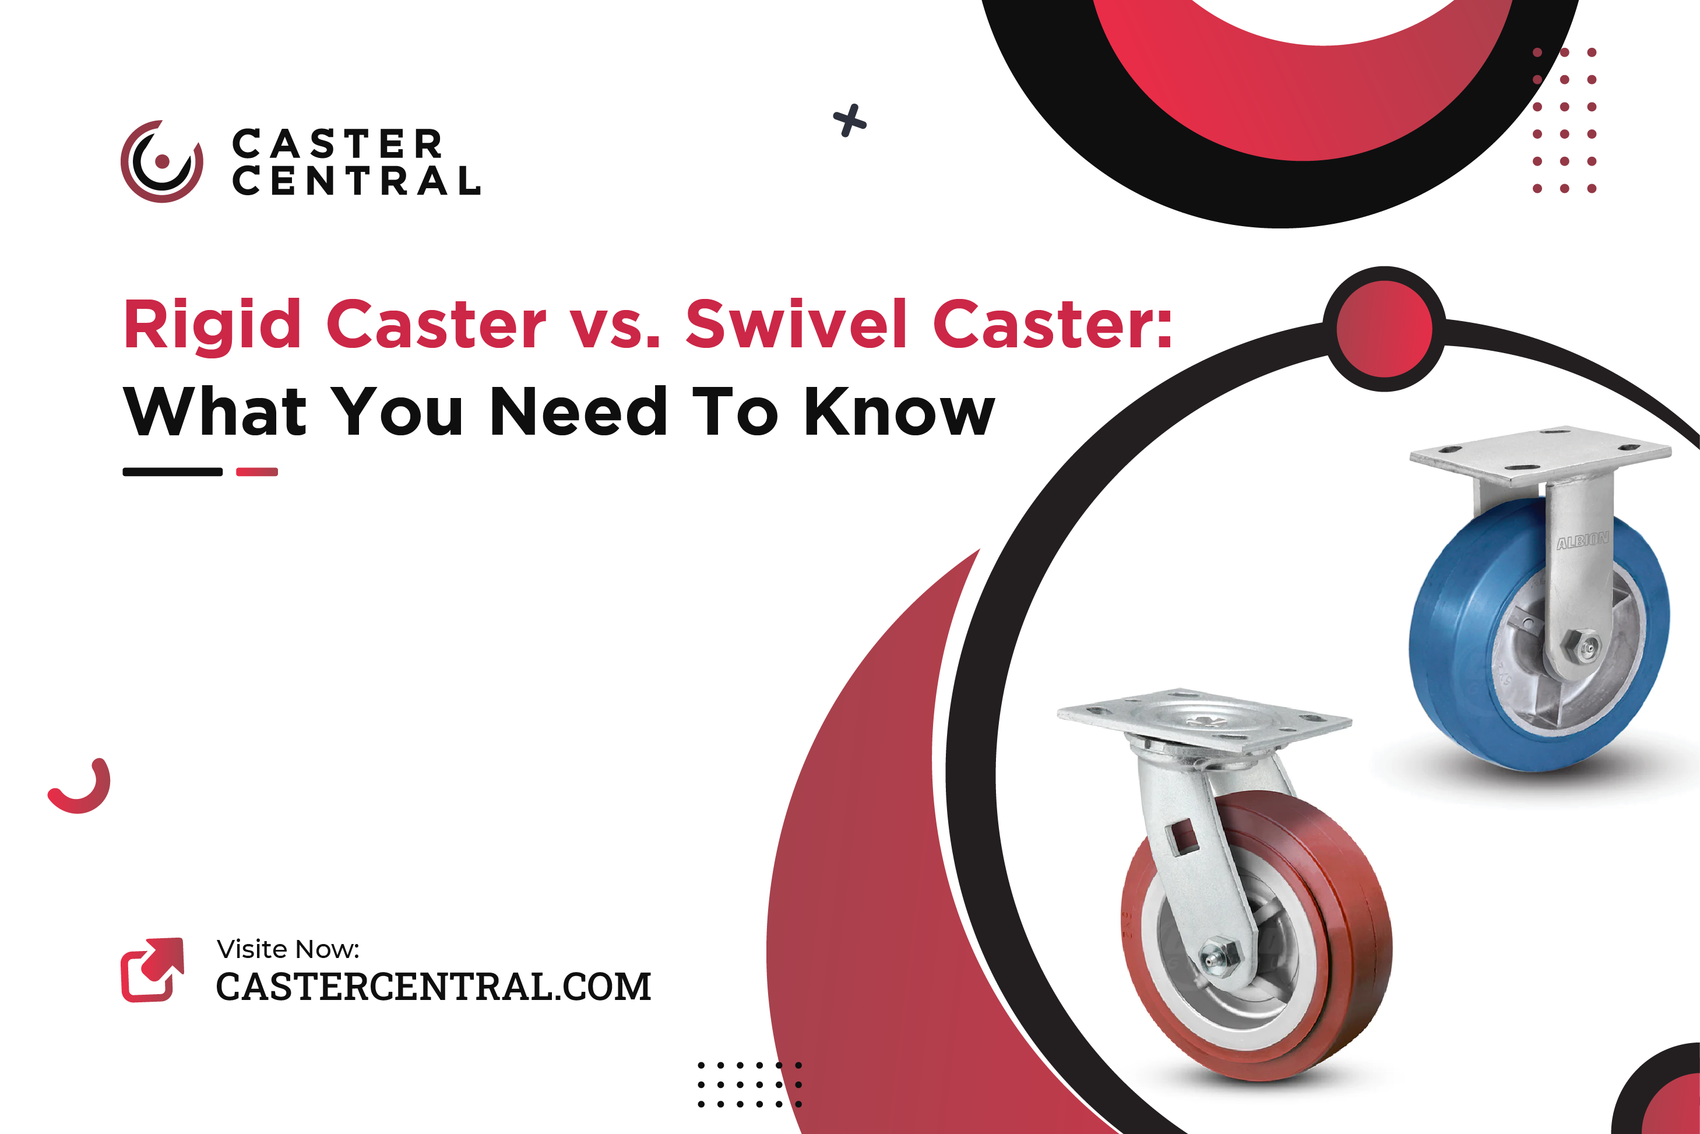 Rigid Caster vs. Swivel Caster: What You Need To Know